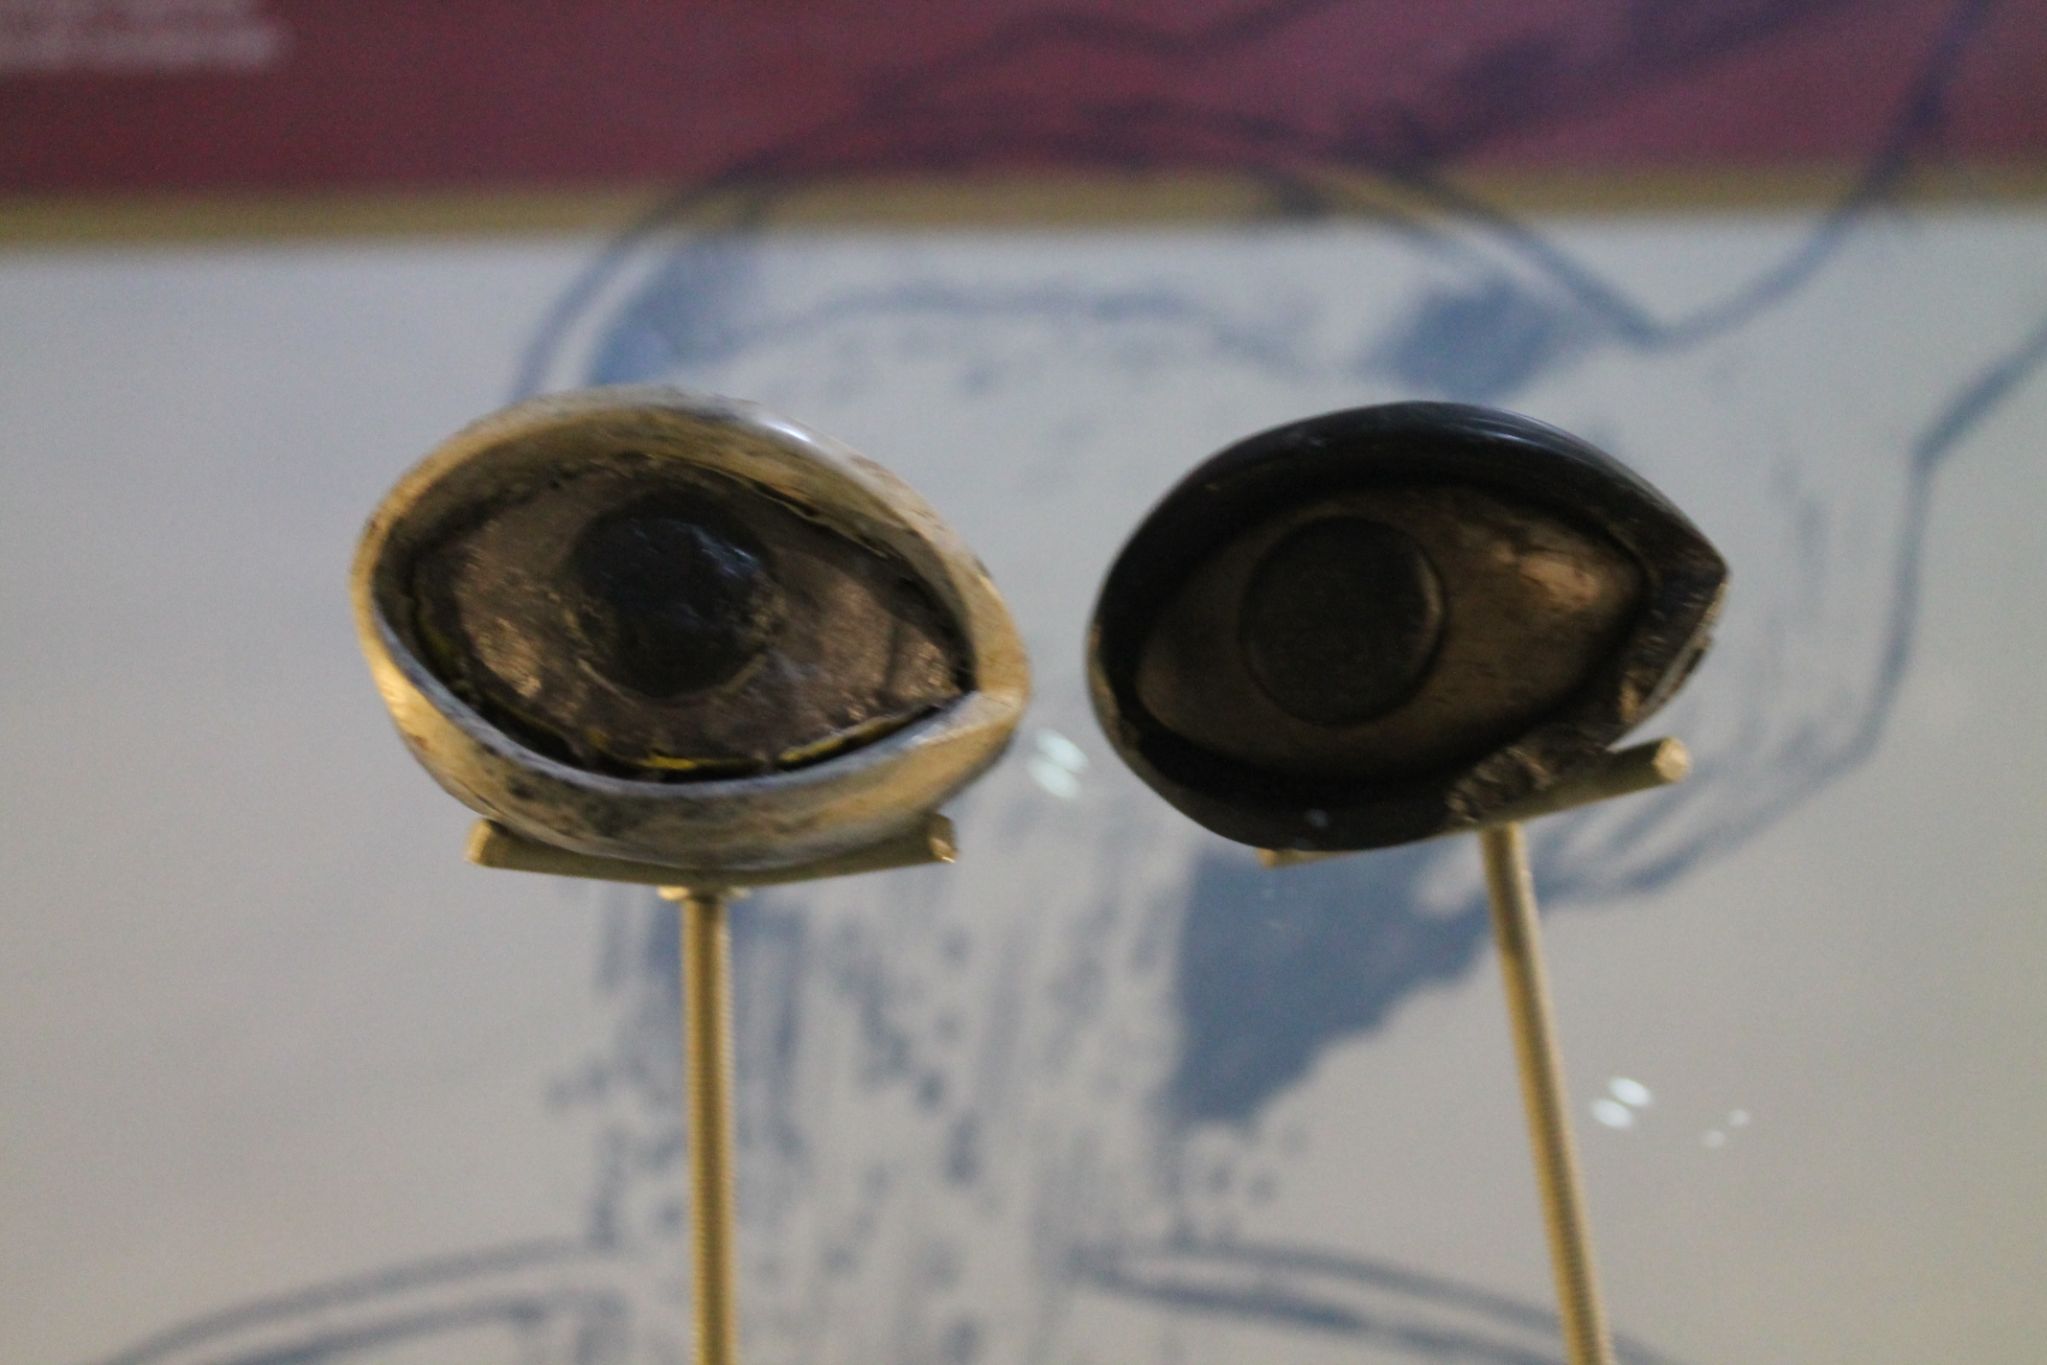 Eye idols, thought to represent offerings to Gods